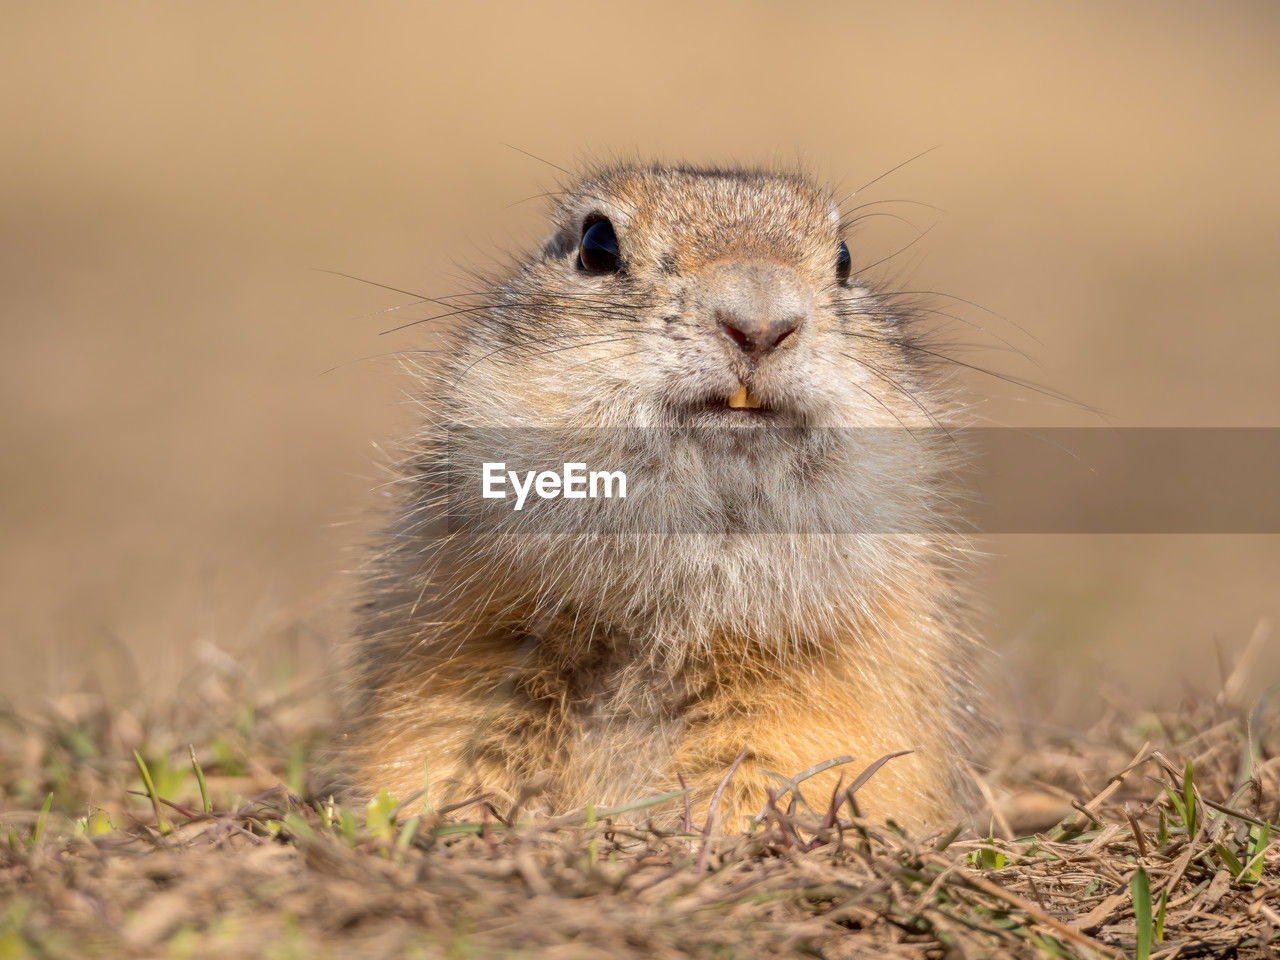 animal, animal themes, animal wildlife, one animal, mammal, whiskers, prairie dog, wildlife, portrait, squirrel, rodent, looking at camera, no people, nature, prairie, close-up, grass, outdoors, cute, day, selective focus, front view, plant, animal hair, animal body part, land